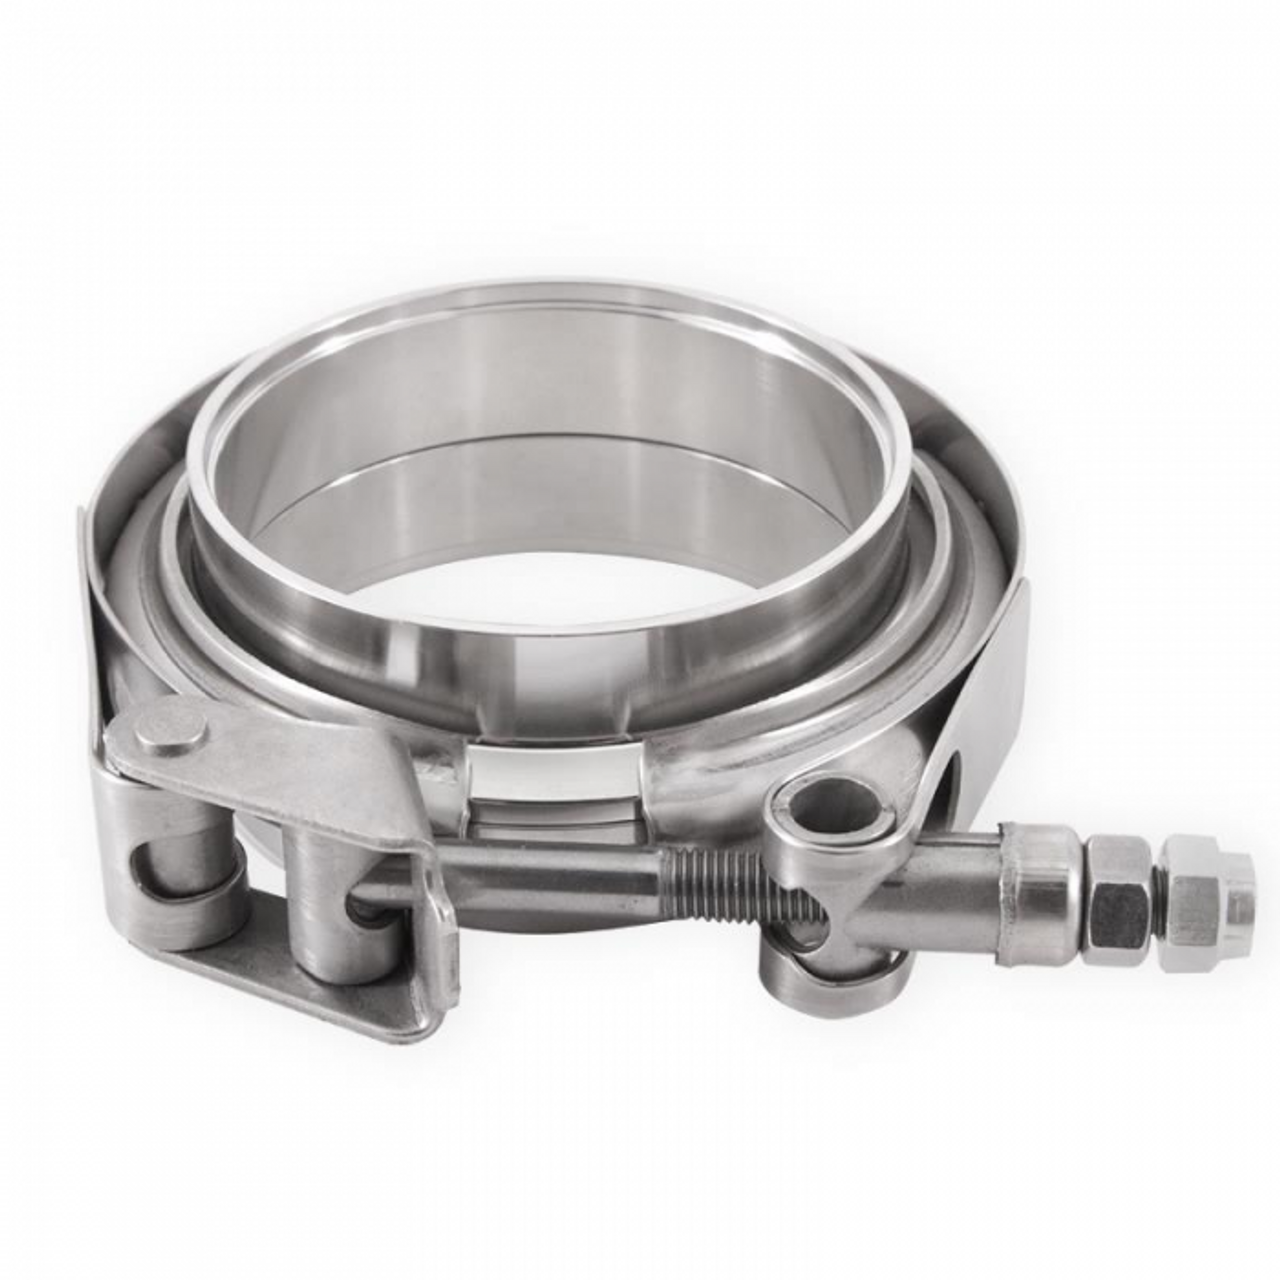 Mishimoto Stainless 3.5" V Bank Clamp with Flange (Universal for 3.5" Connections) (MIMMCLAMP-VS-35)-Main View